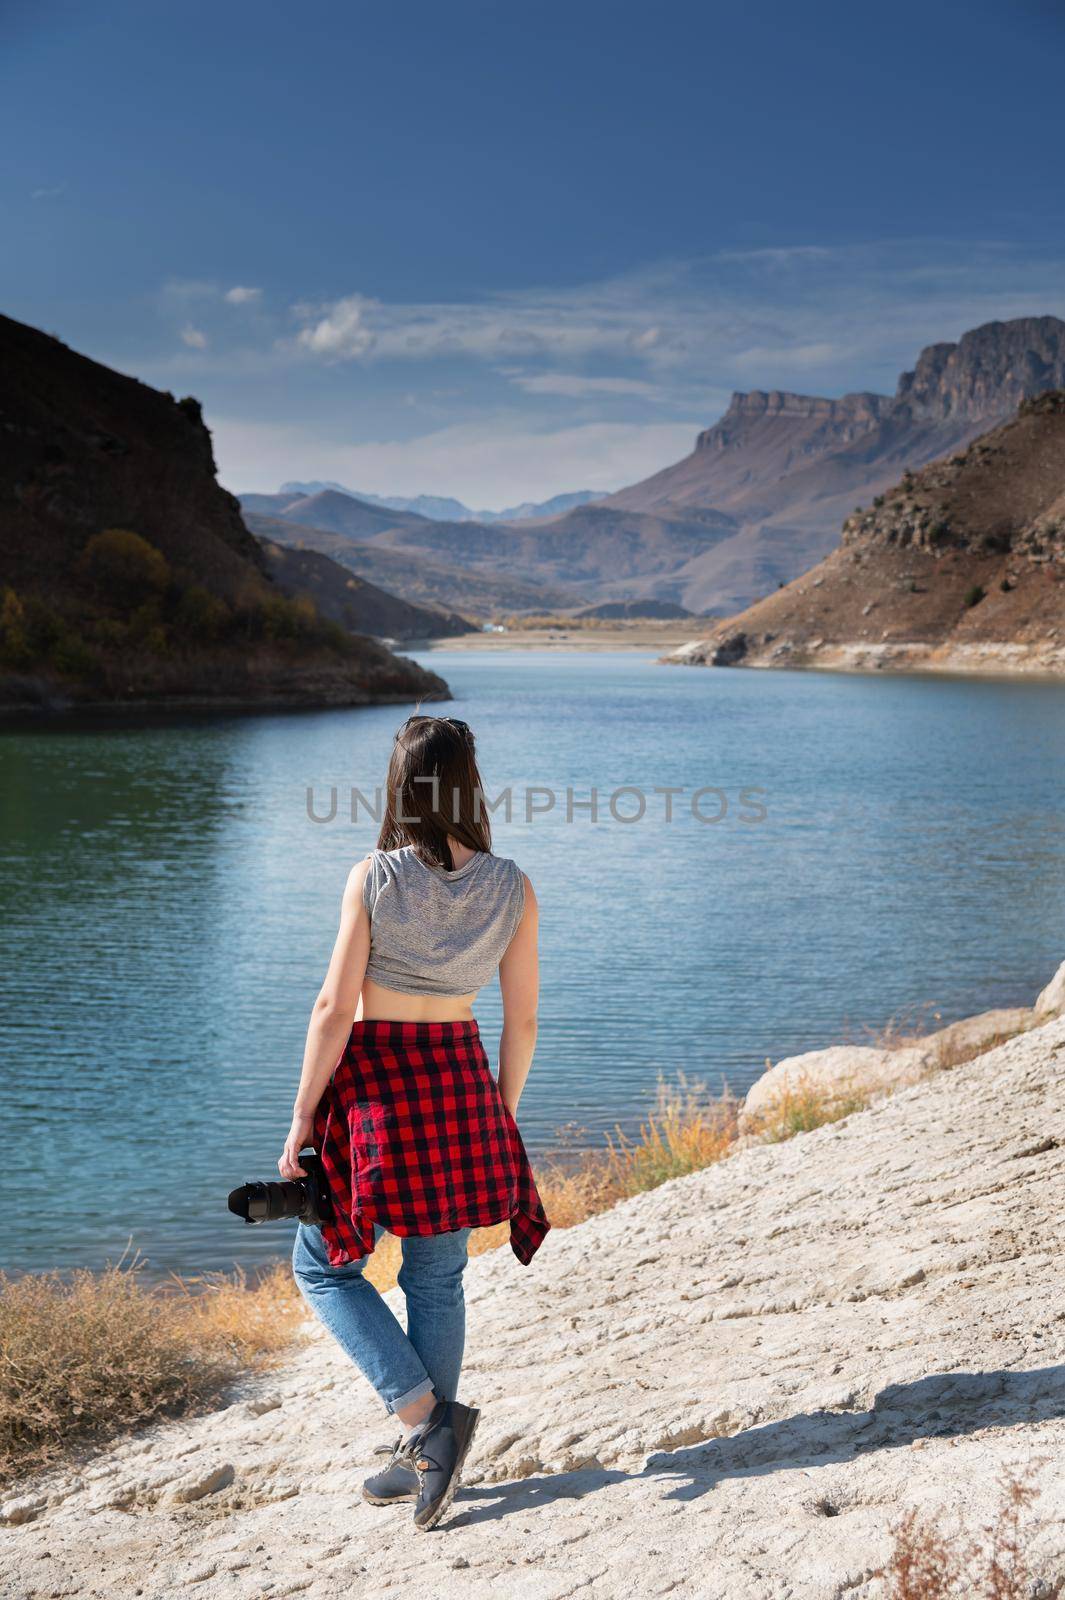 Back view a woman photographer in casual clothes with a professional camera stands on the shore of a lake in the mountains and looks at the rocks. Photo hikes and photo tours by yanik88